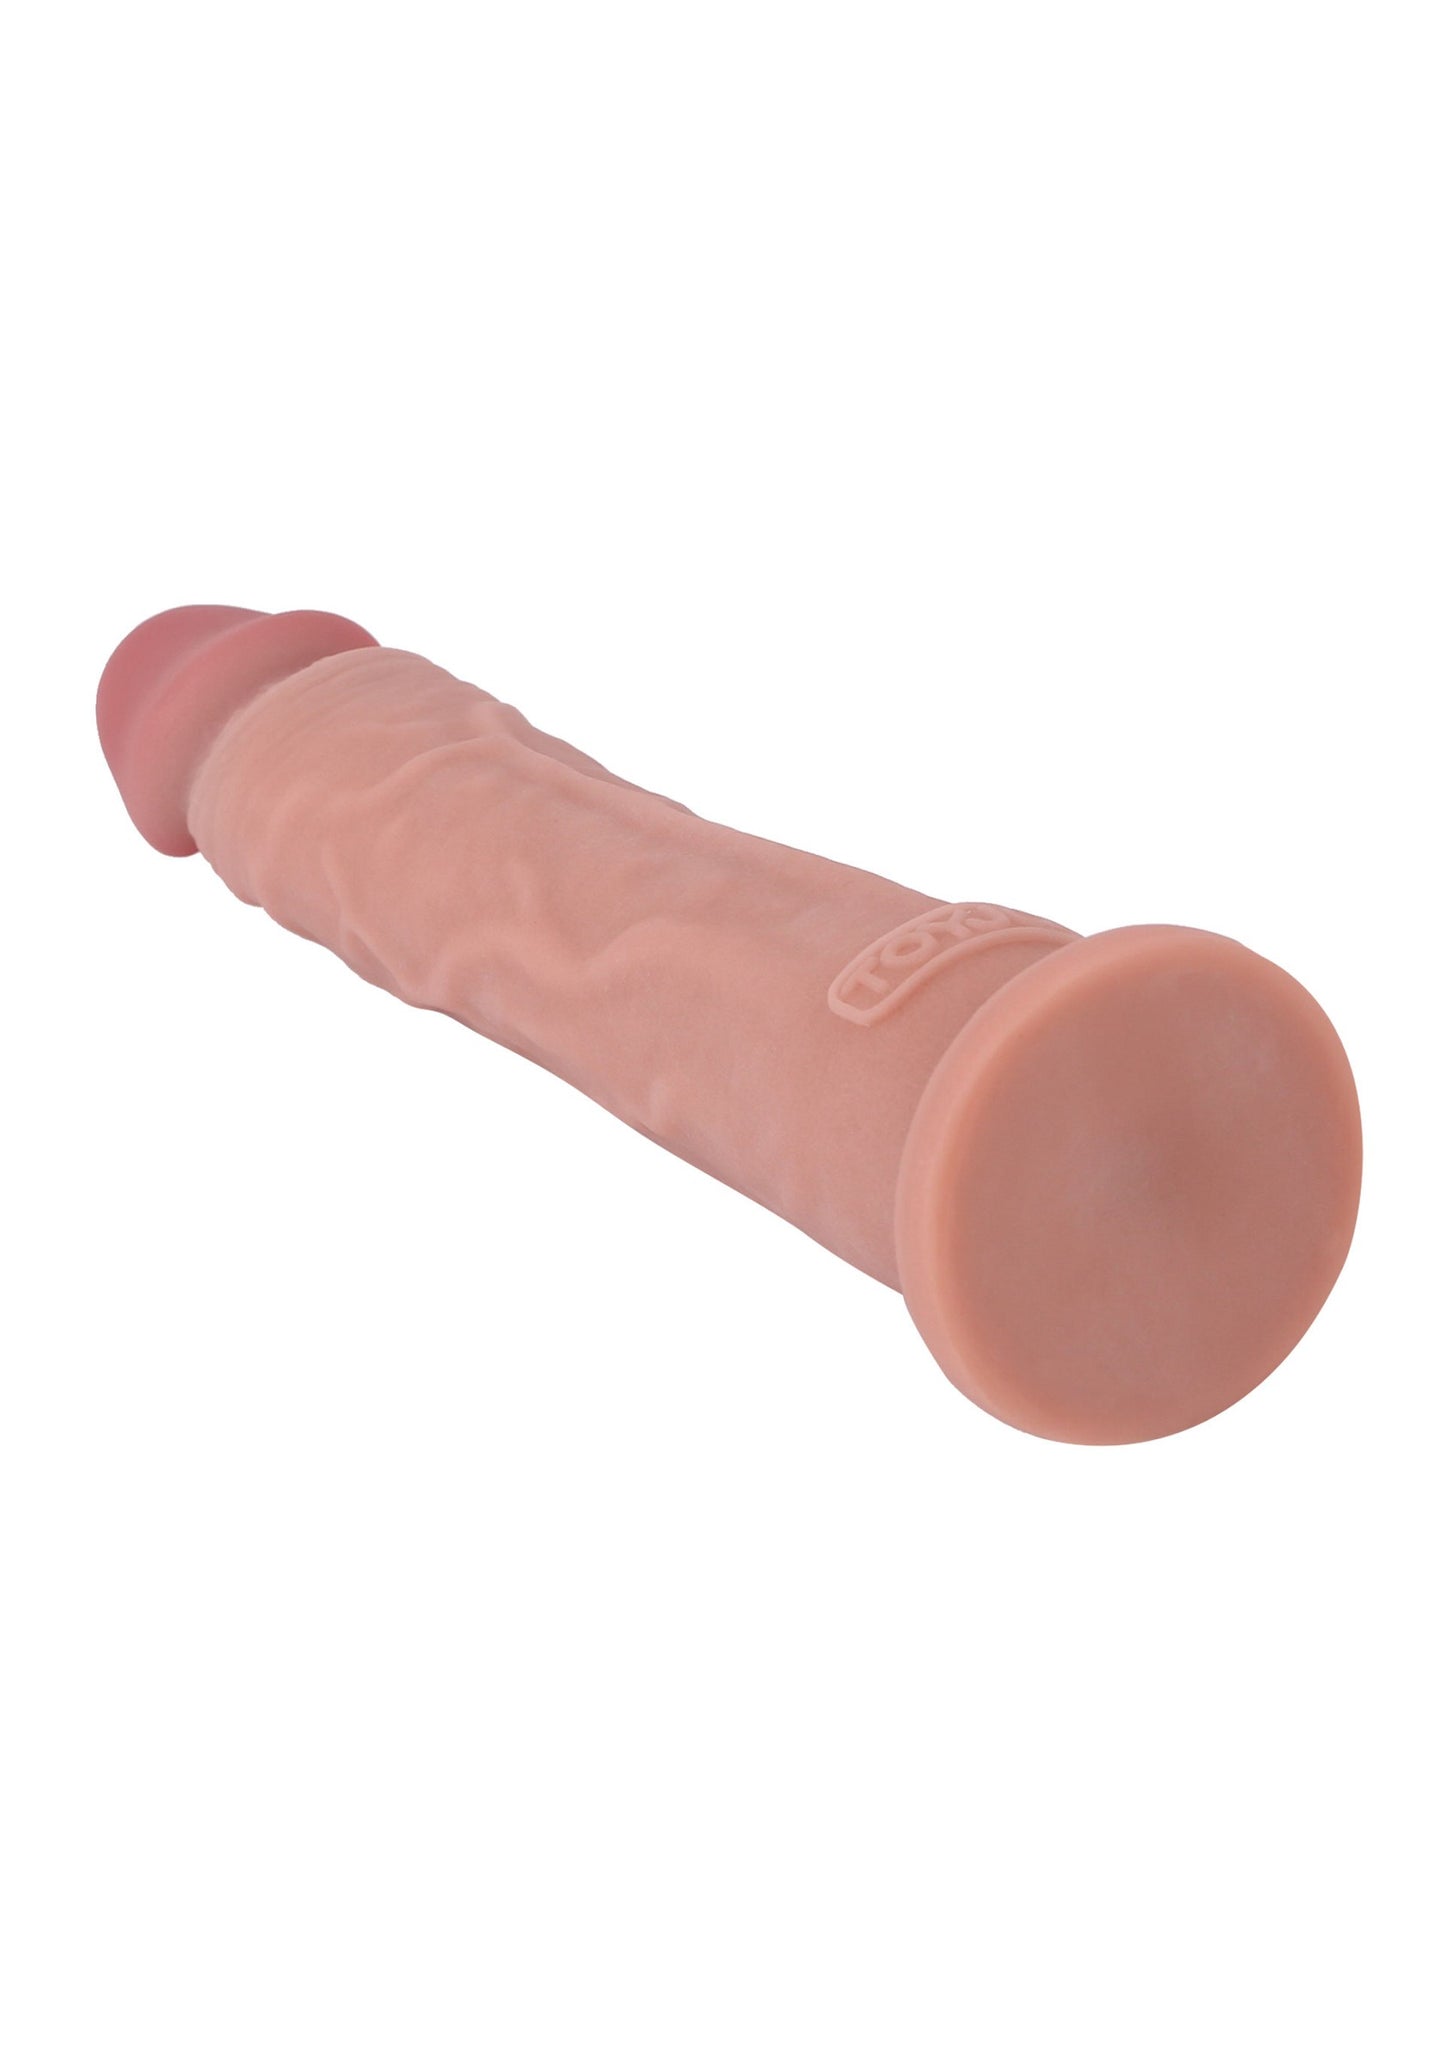 ToyJoy Get Real Deluxe Dual Density Dong 9' SKIN - 1